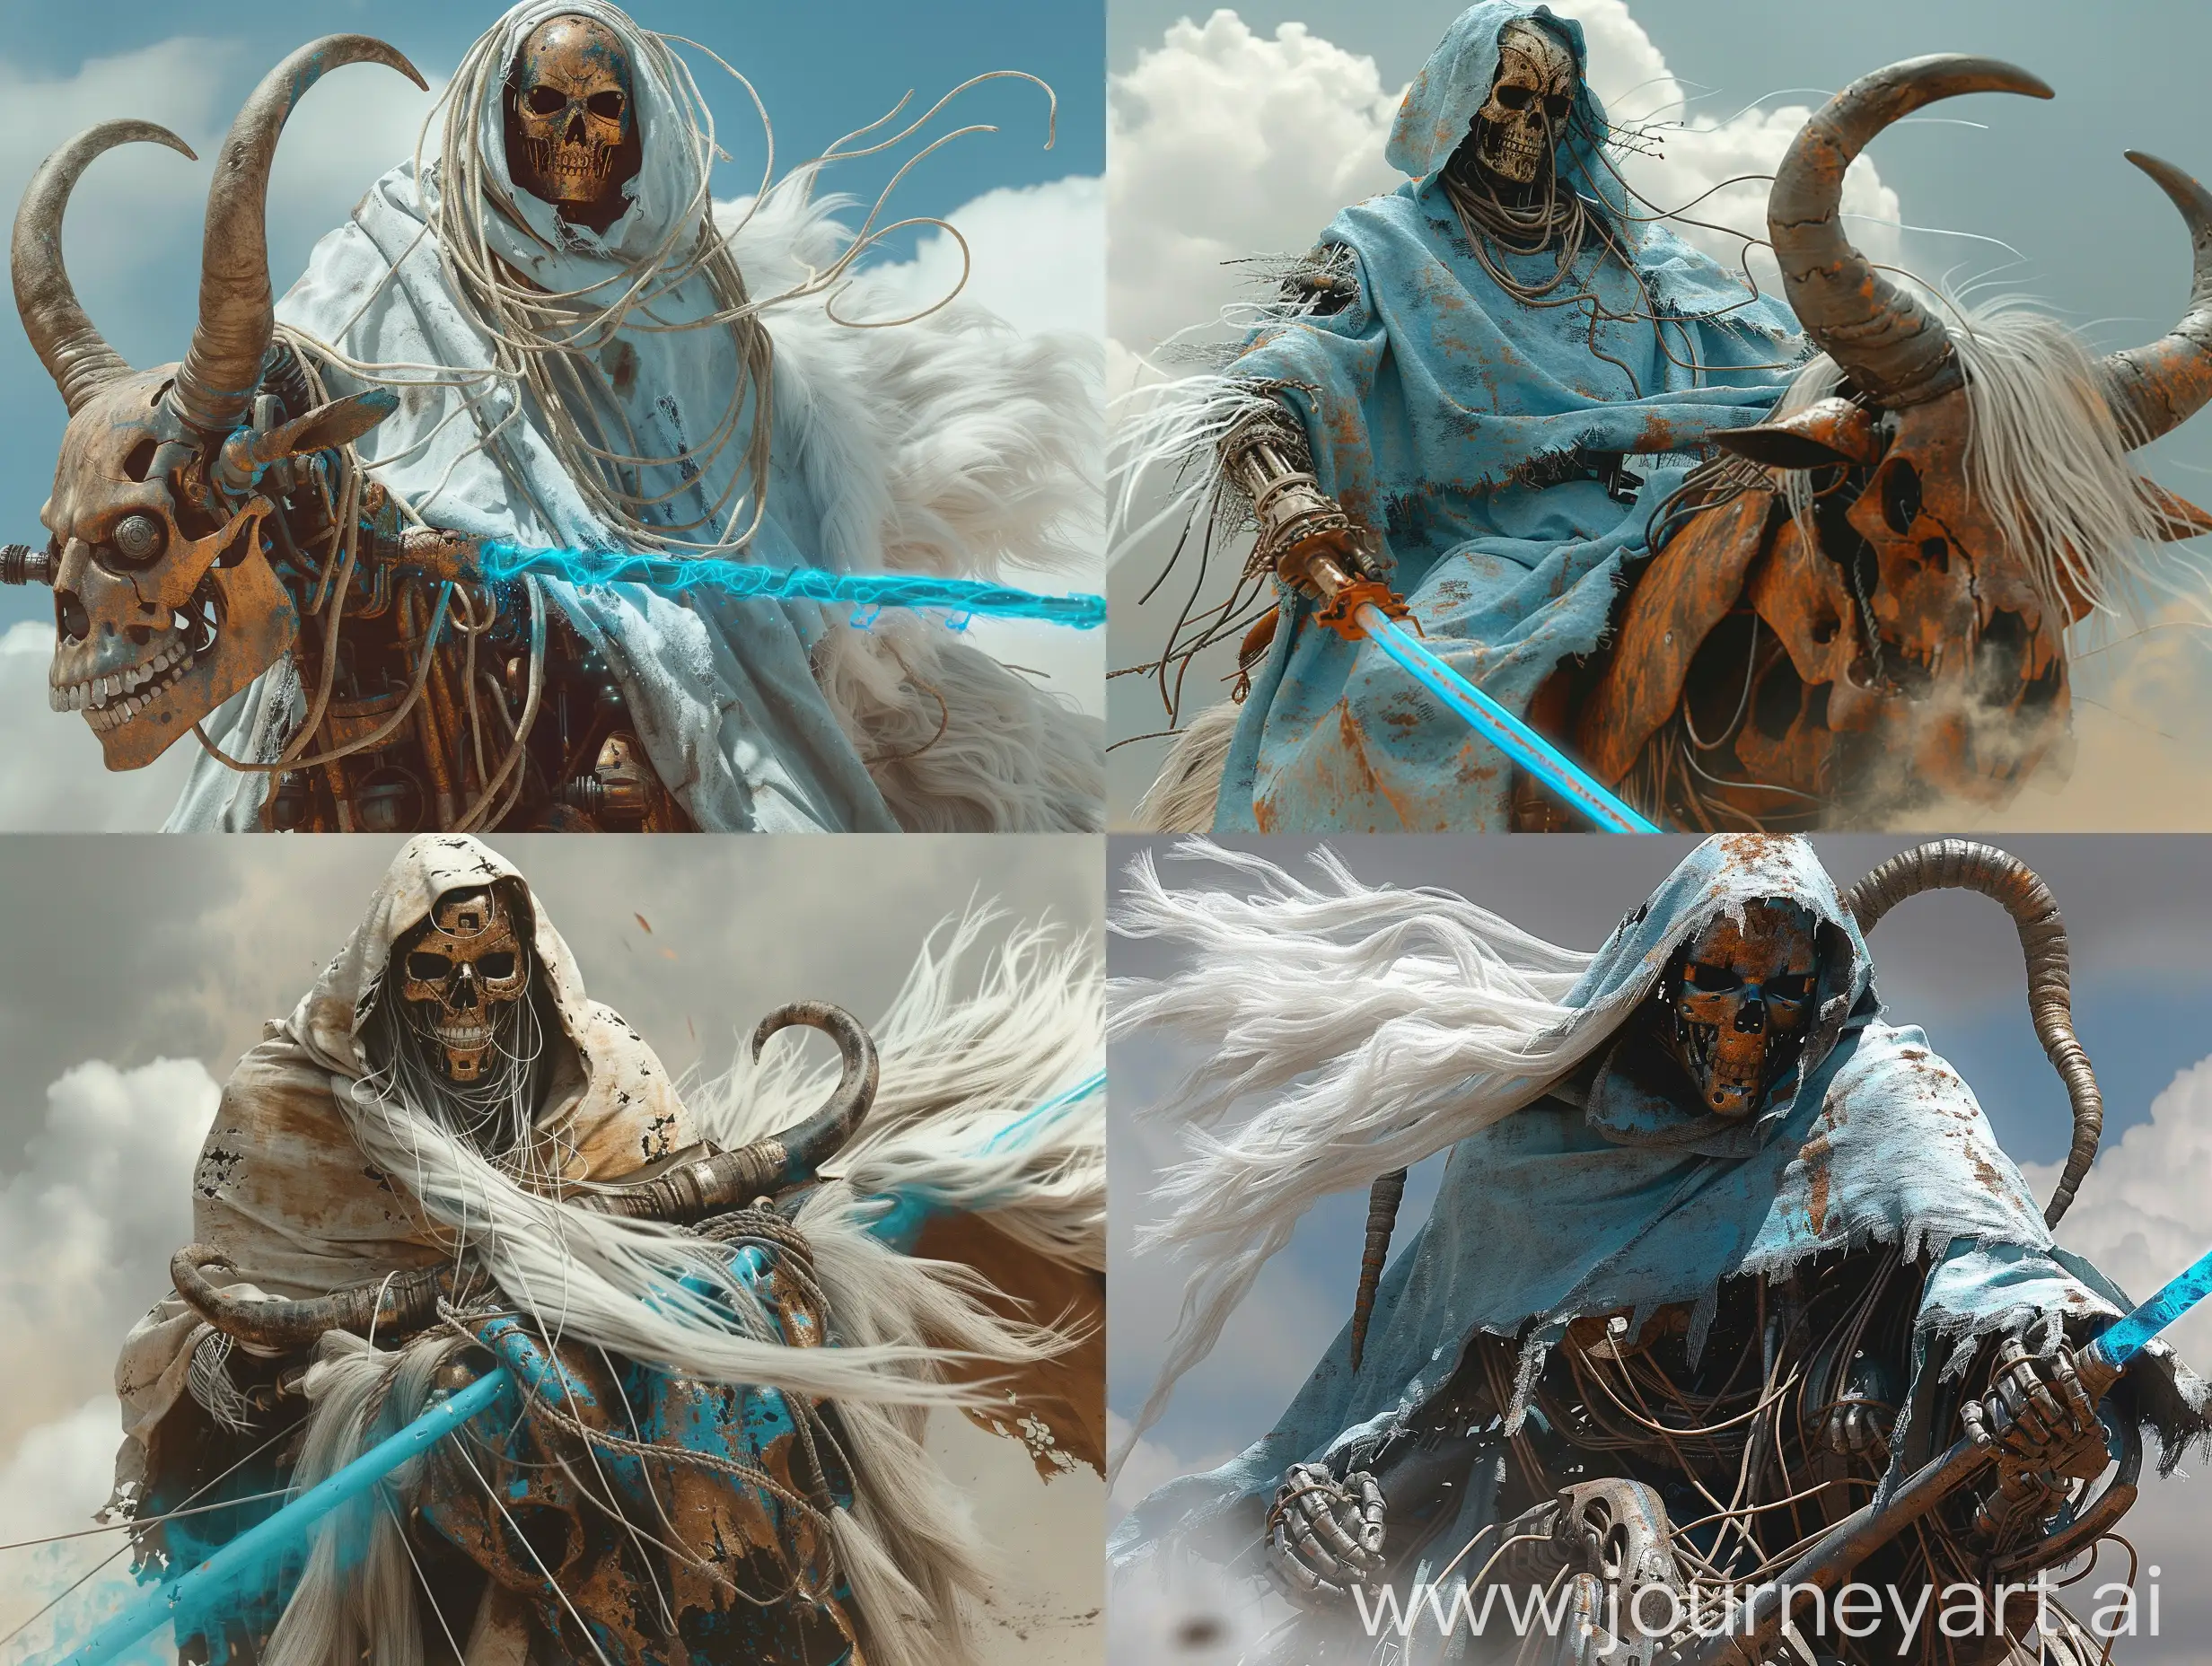 extreme low angle scary shot from below, Head and shoulders portrait of dystopian rusty rustic spindly sci-fi hooded robotic cyborg automaton riding a massive alien yak creature with long white fur and coiled horns , (bronze masked face) with wires and prosthetics; wearing a intense light_blue ragged torn long monk’s cloak robe whipping in wind and dust clouds. Cloak painted with clumsily painted (large visible brush strokes) skull, holding long rusty glowing bluecybersword